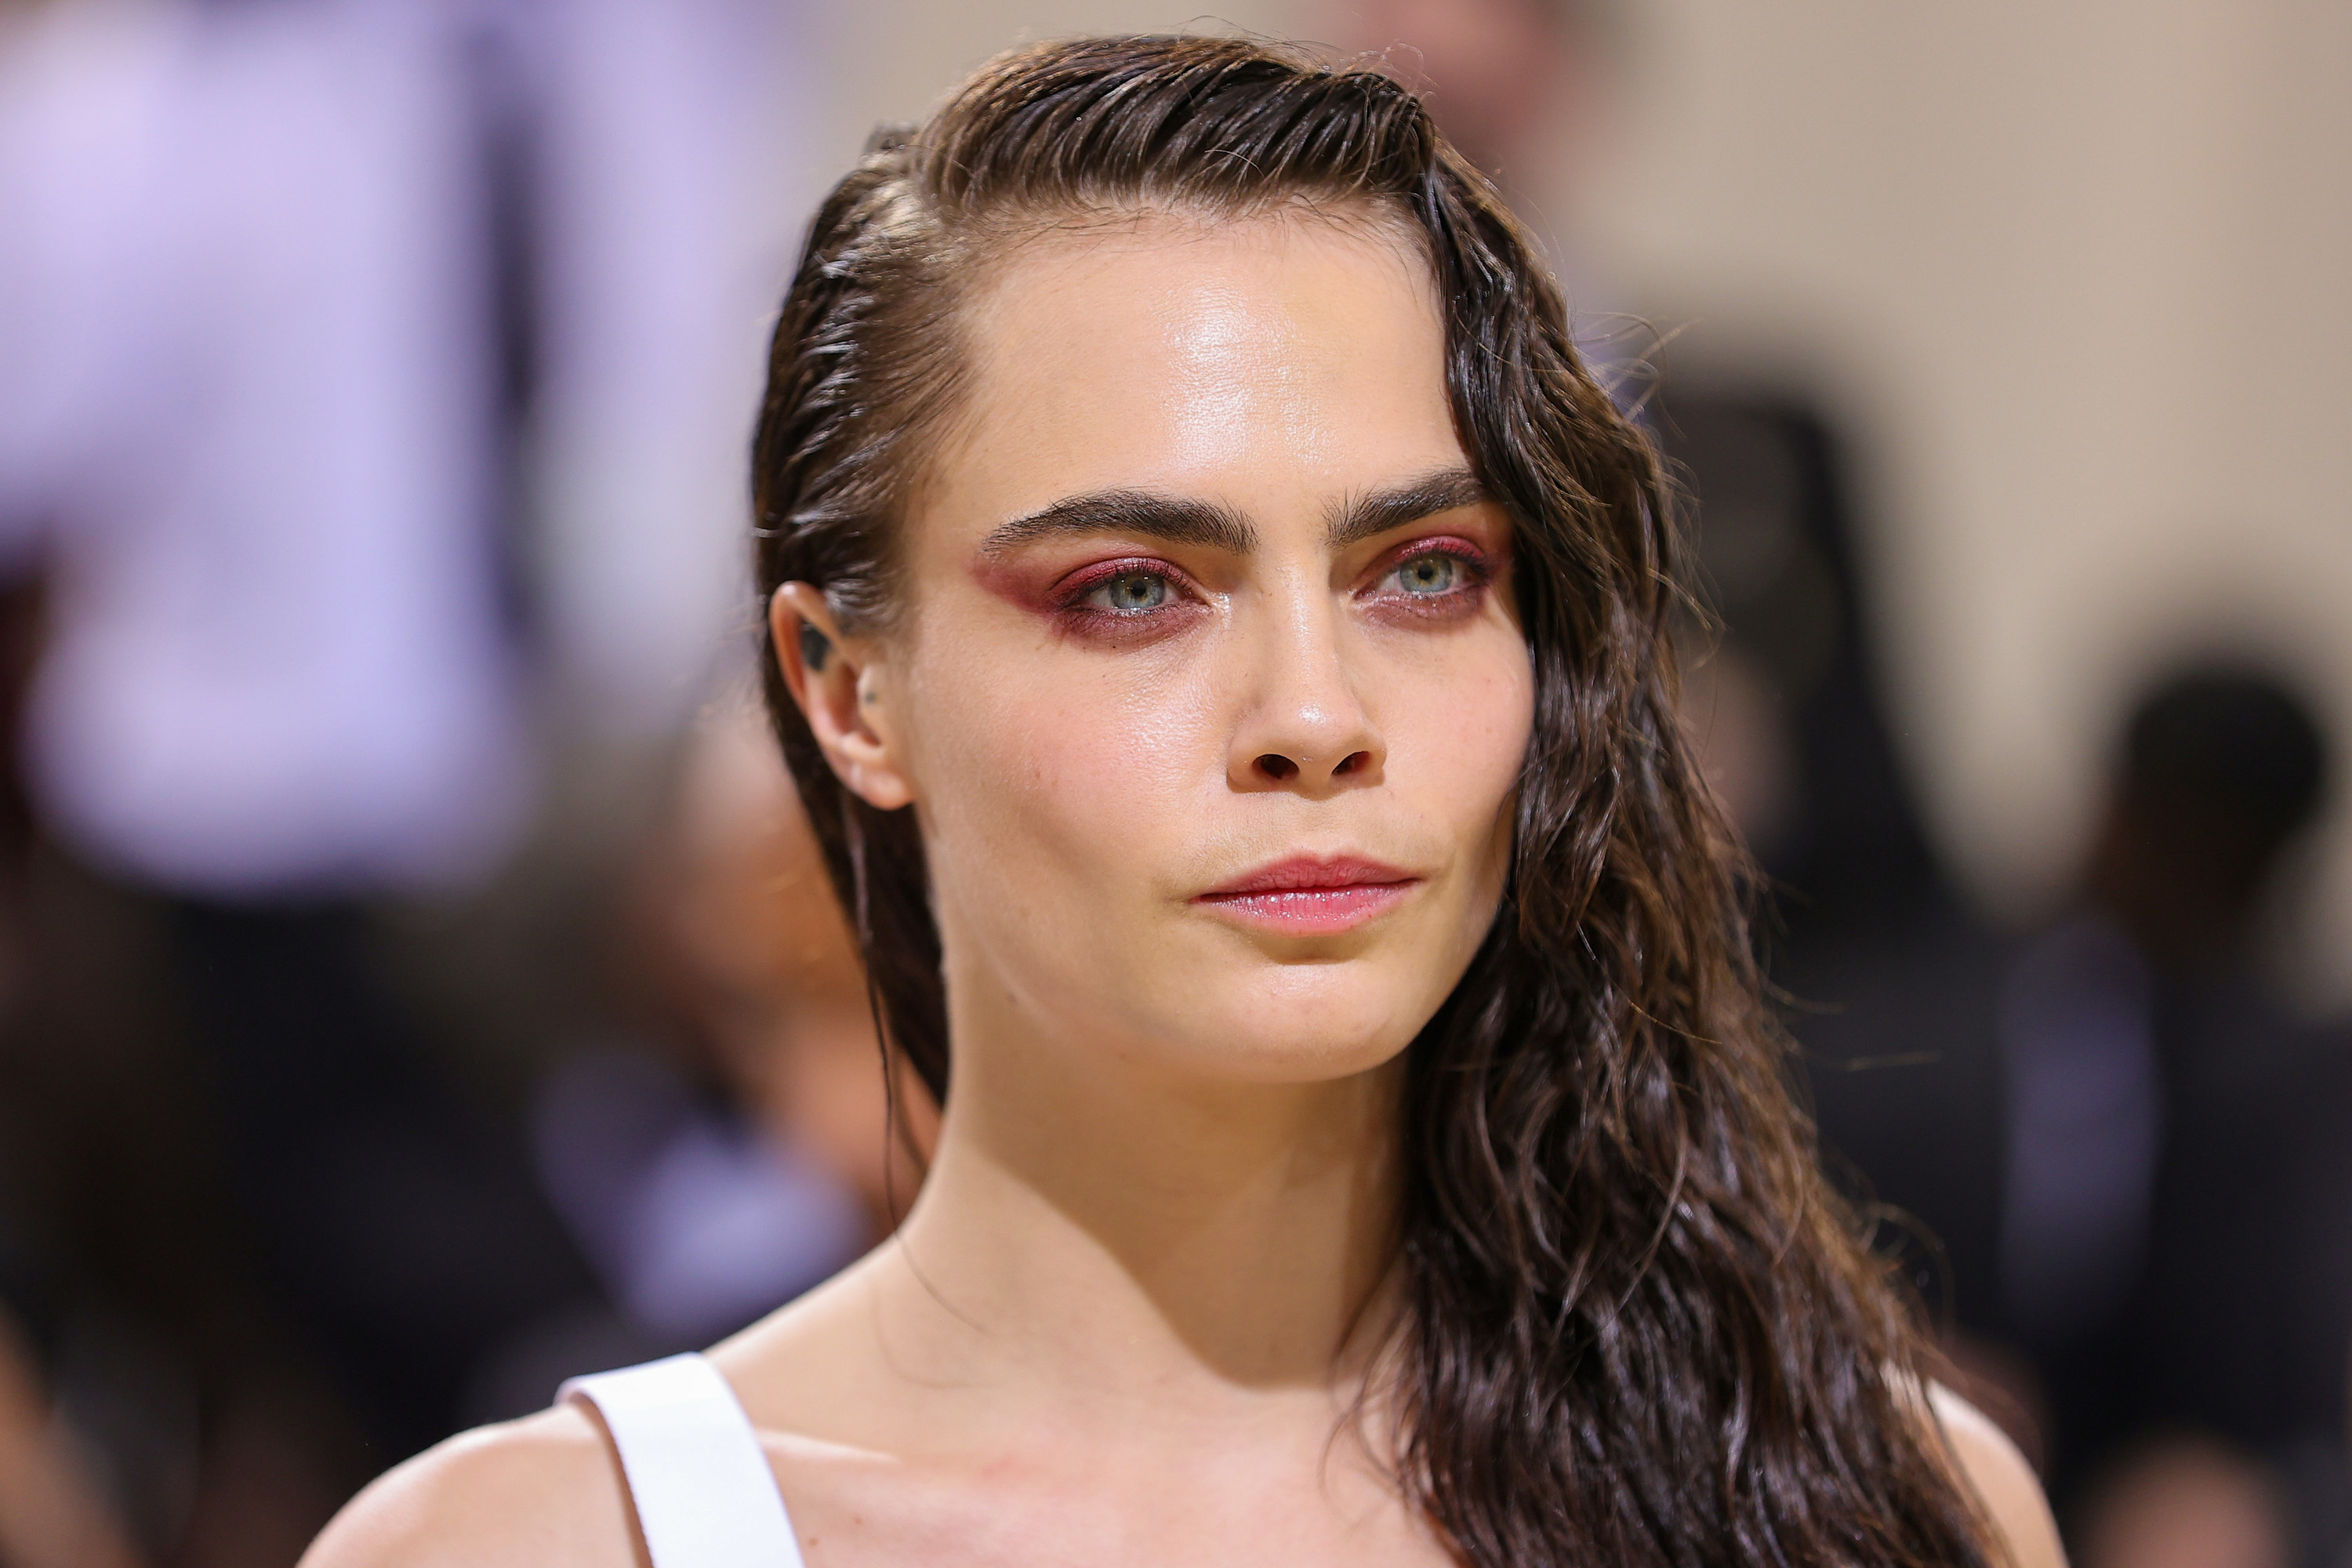 Cara Delevingne attends The 2021 Met Gala Celebrating In America: A Lexicon Of Fashion at Metropolitan Museum of Art